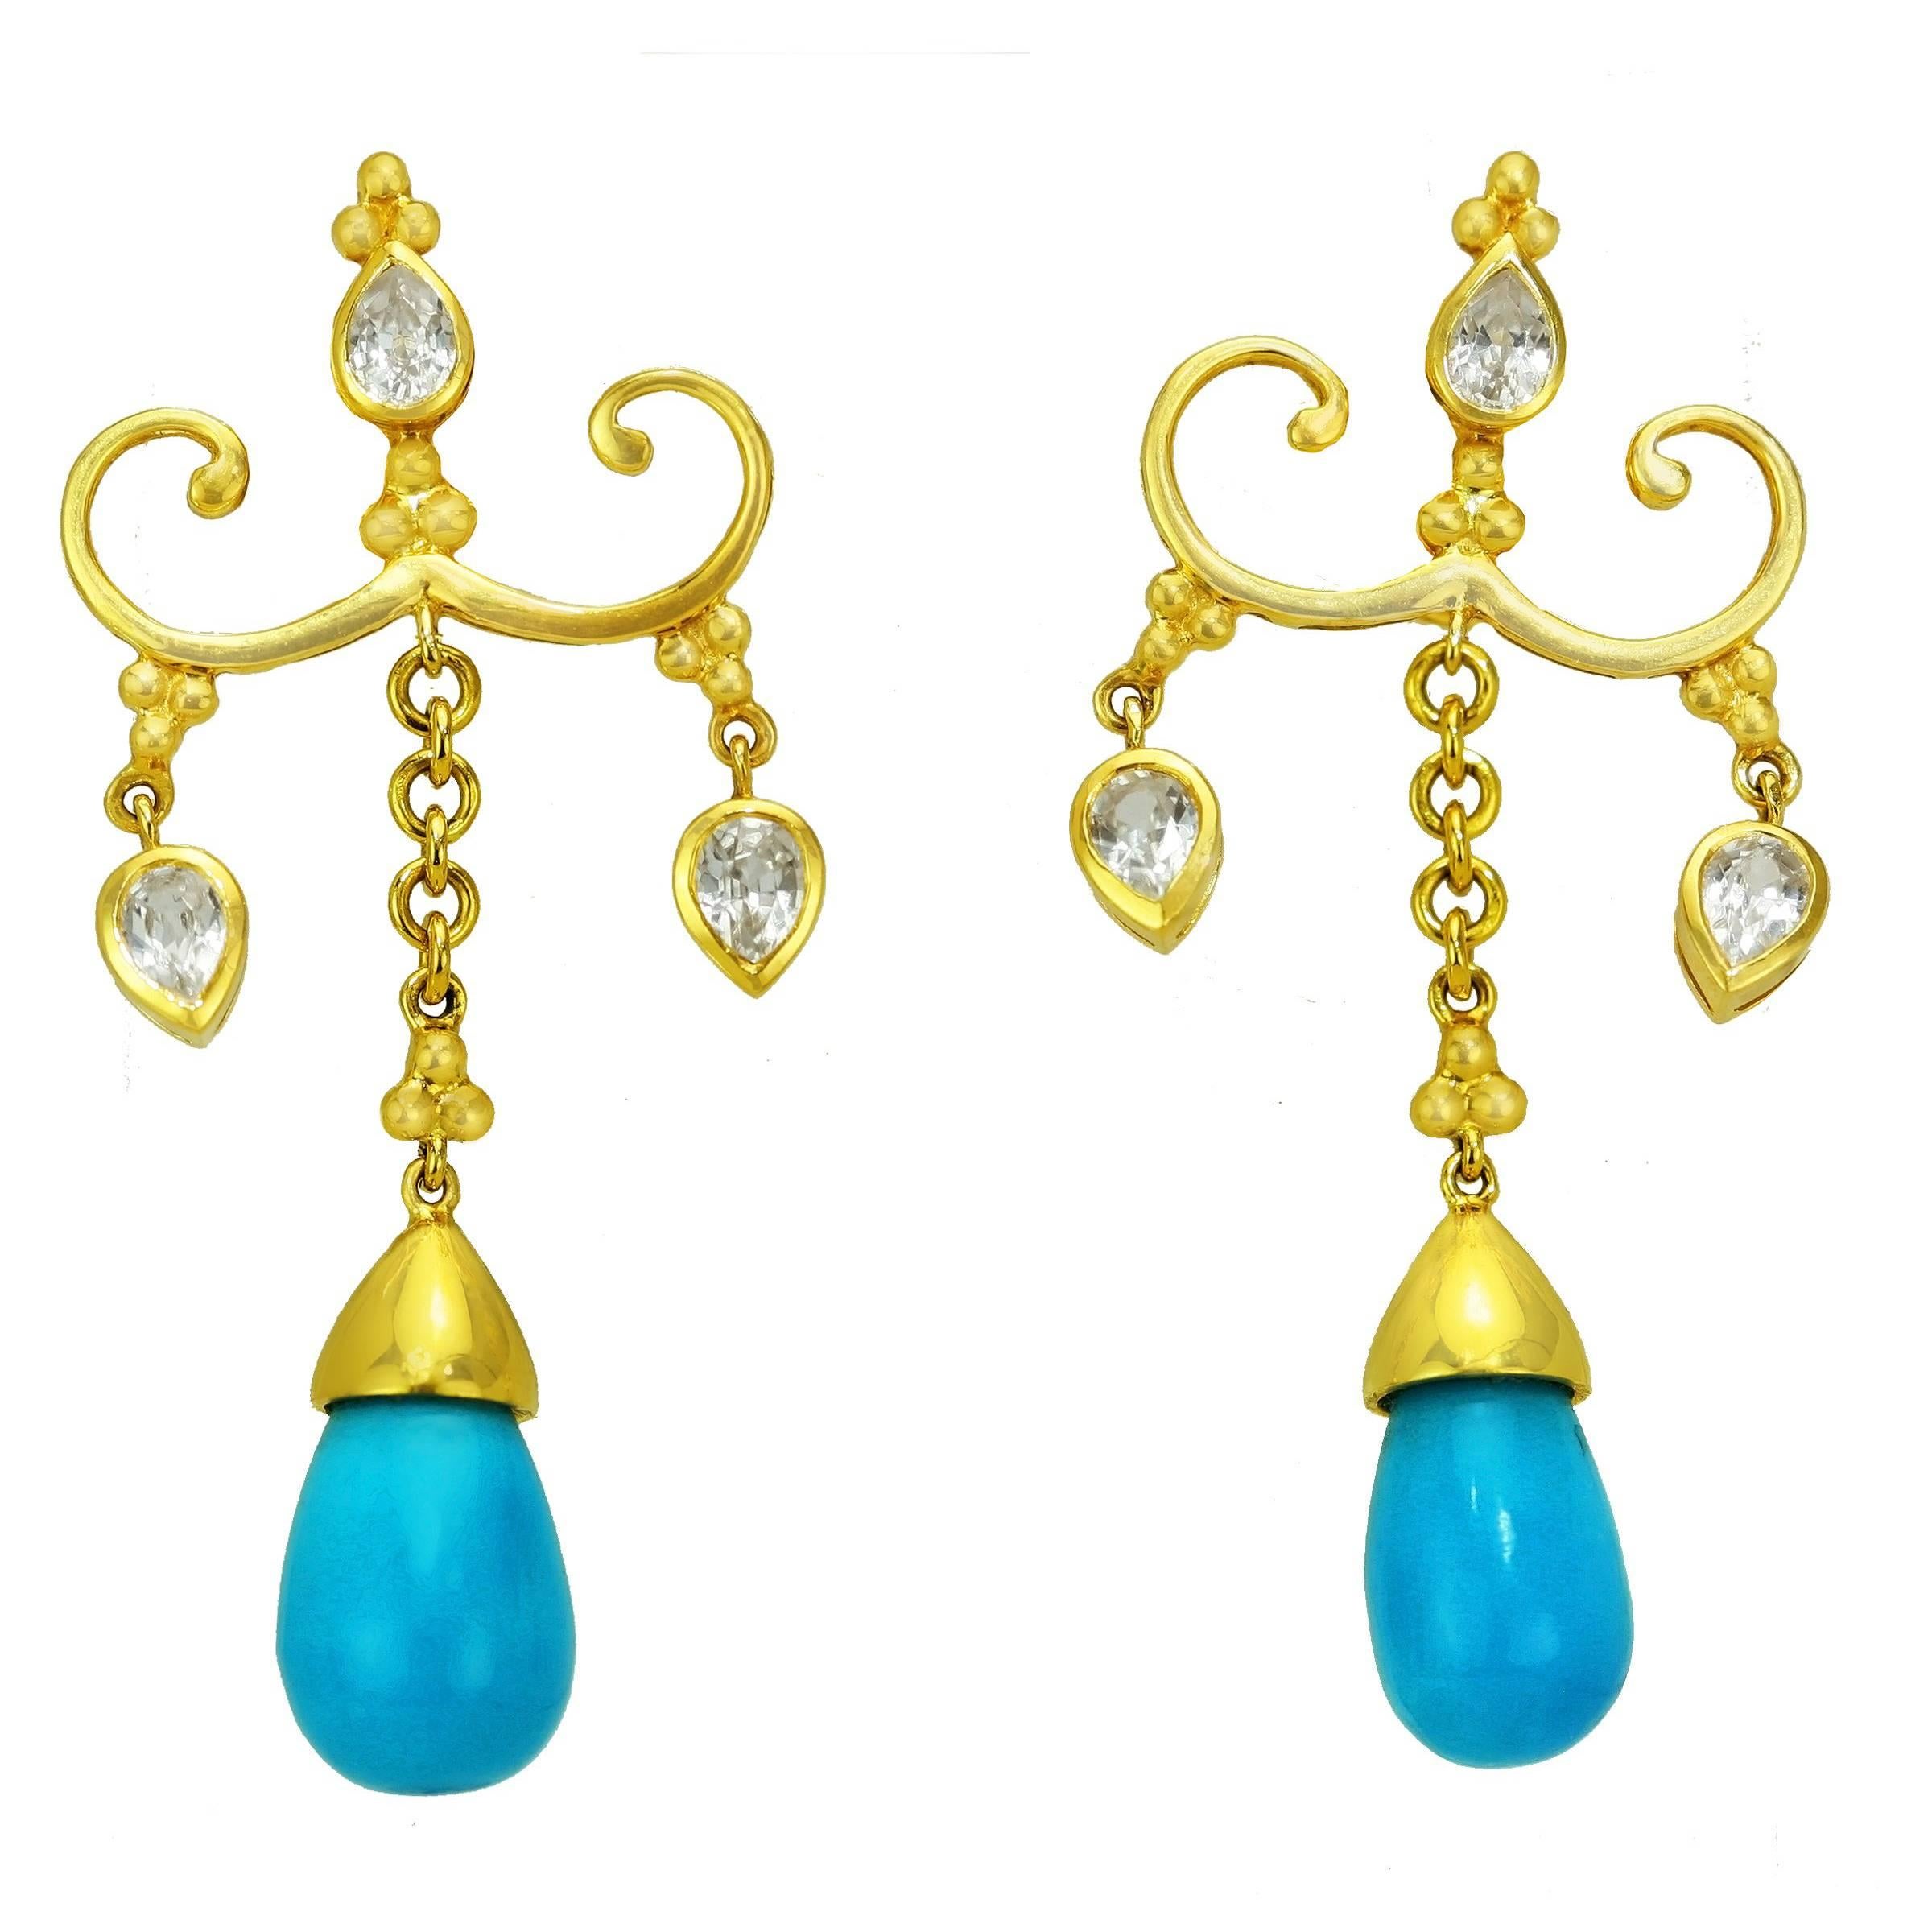 Crevoshay Elegant Handcrafted Turquoise and White Zircon Earrings For Sale